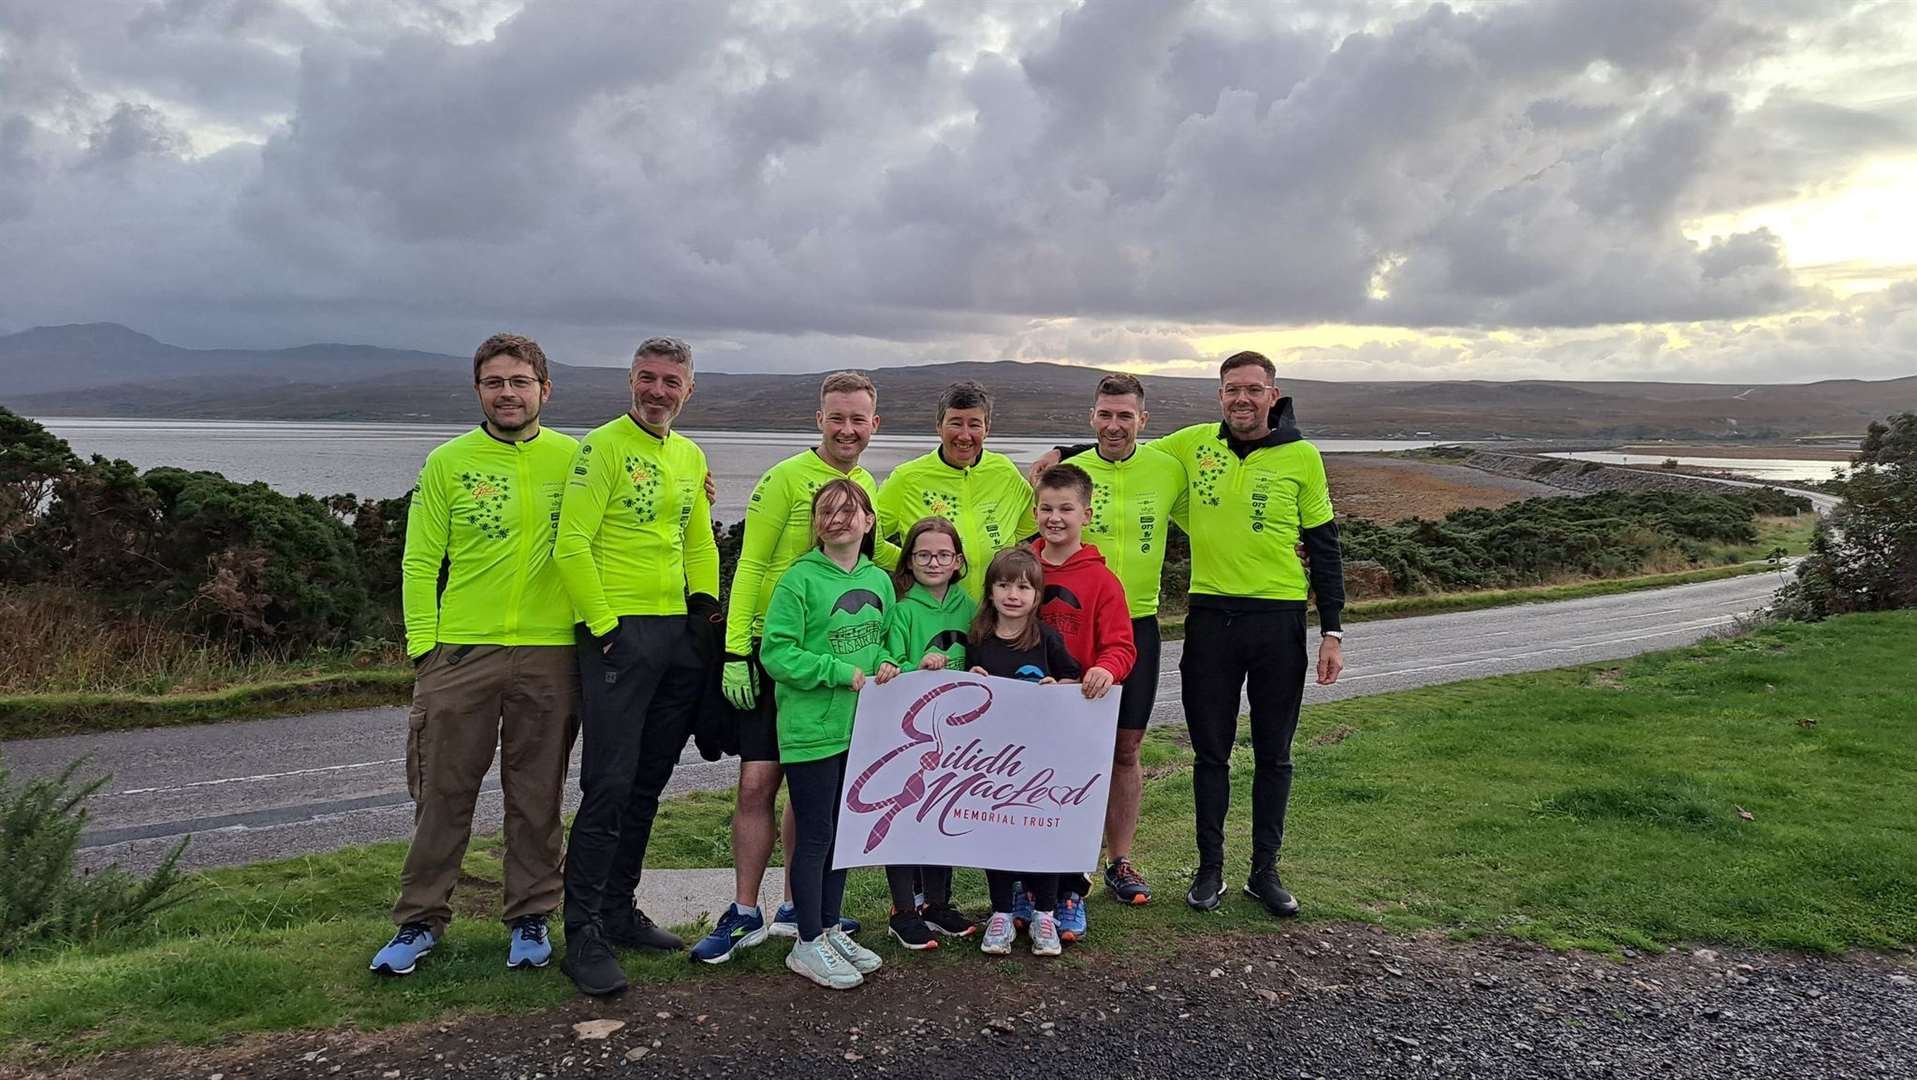 North Coast children who attend Fèis Air an Oir music classes met up with members of the Eilidh MacLeod Memorial Trust when they cycled round NC500. The trust has donated £500 to the feis.